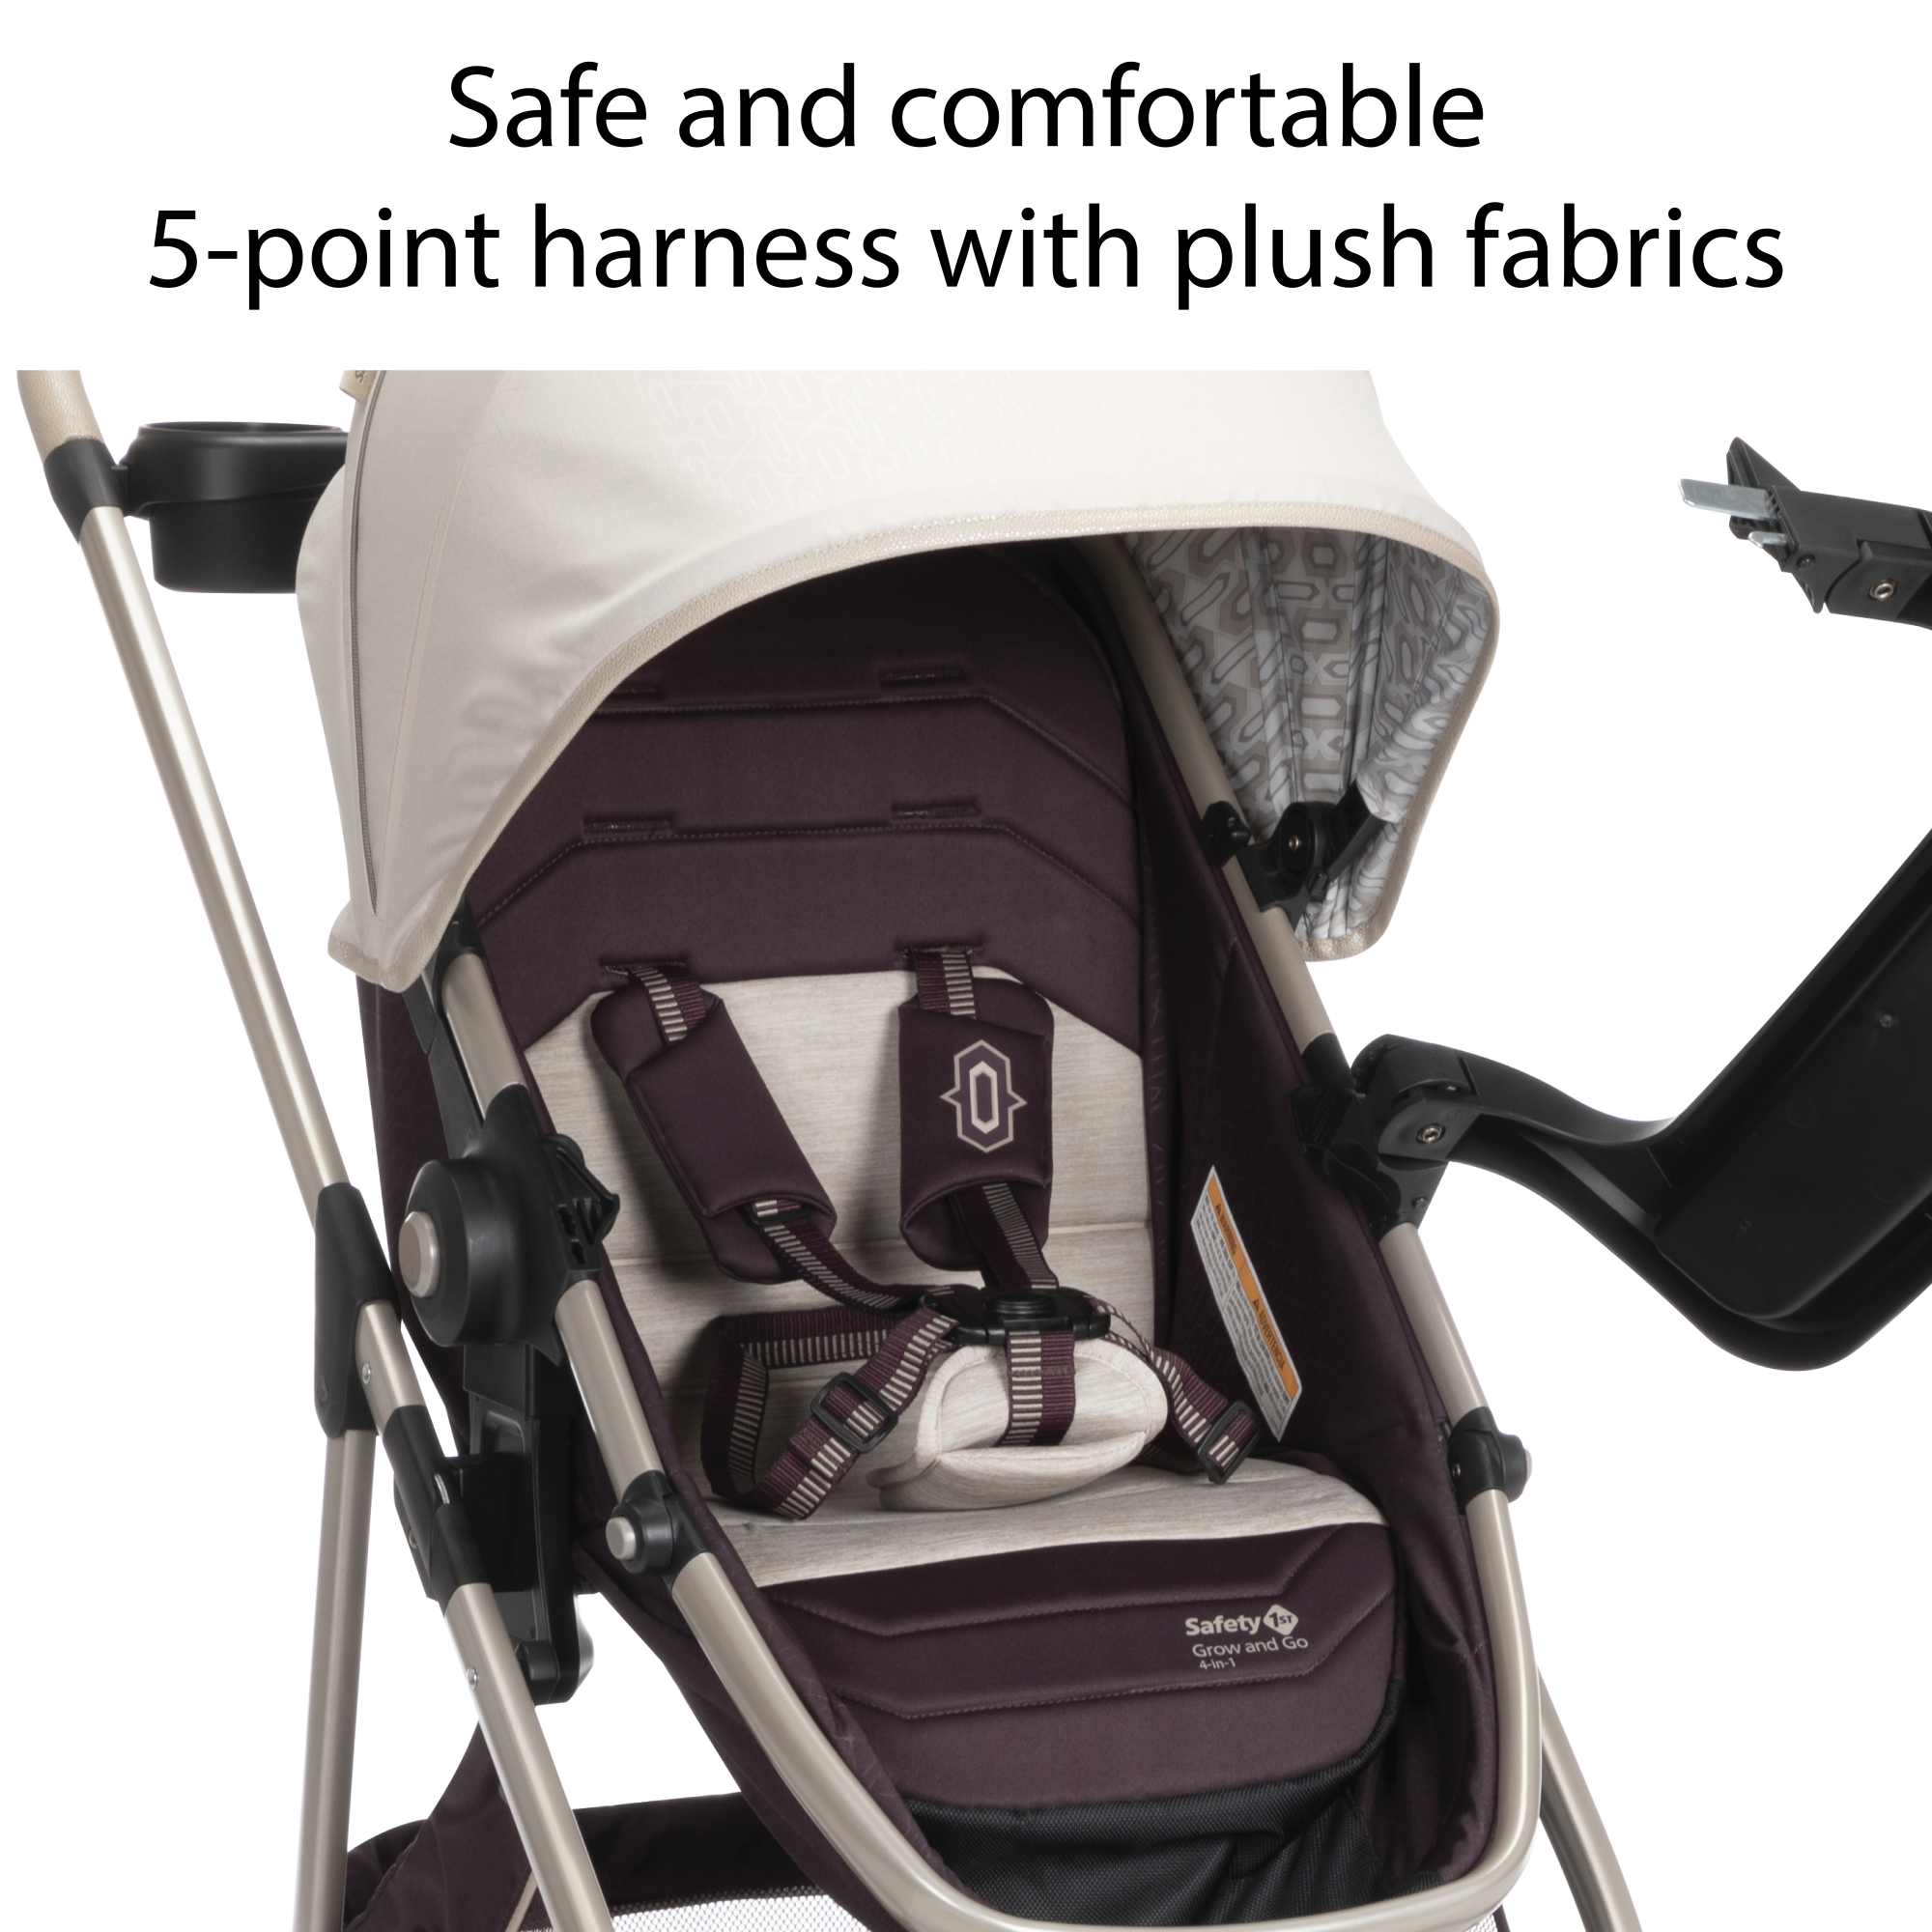 Deluxe Grow and Go™ Flex 8-in-1 Travel System - super-sized canopy with peek-a-boo window